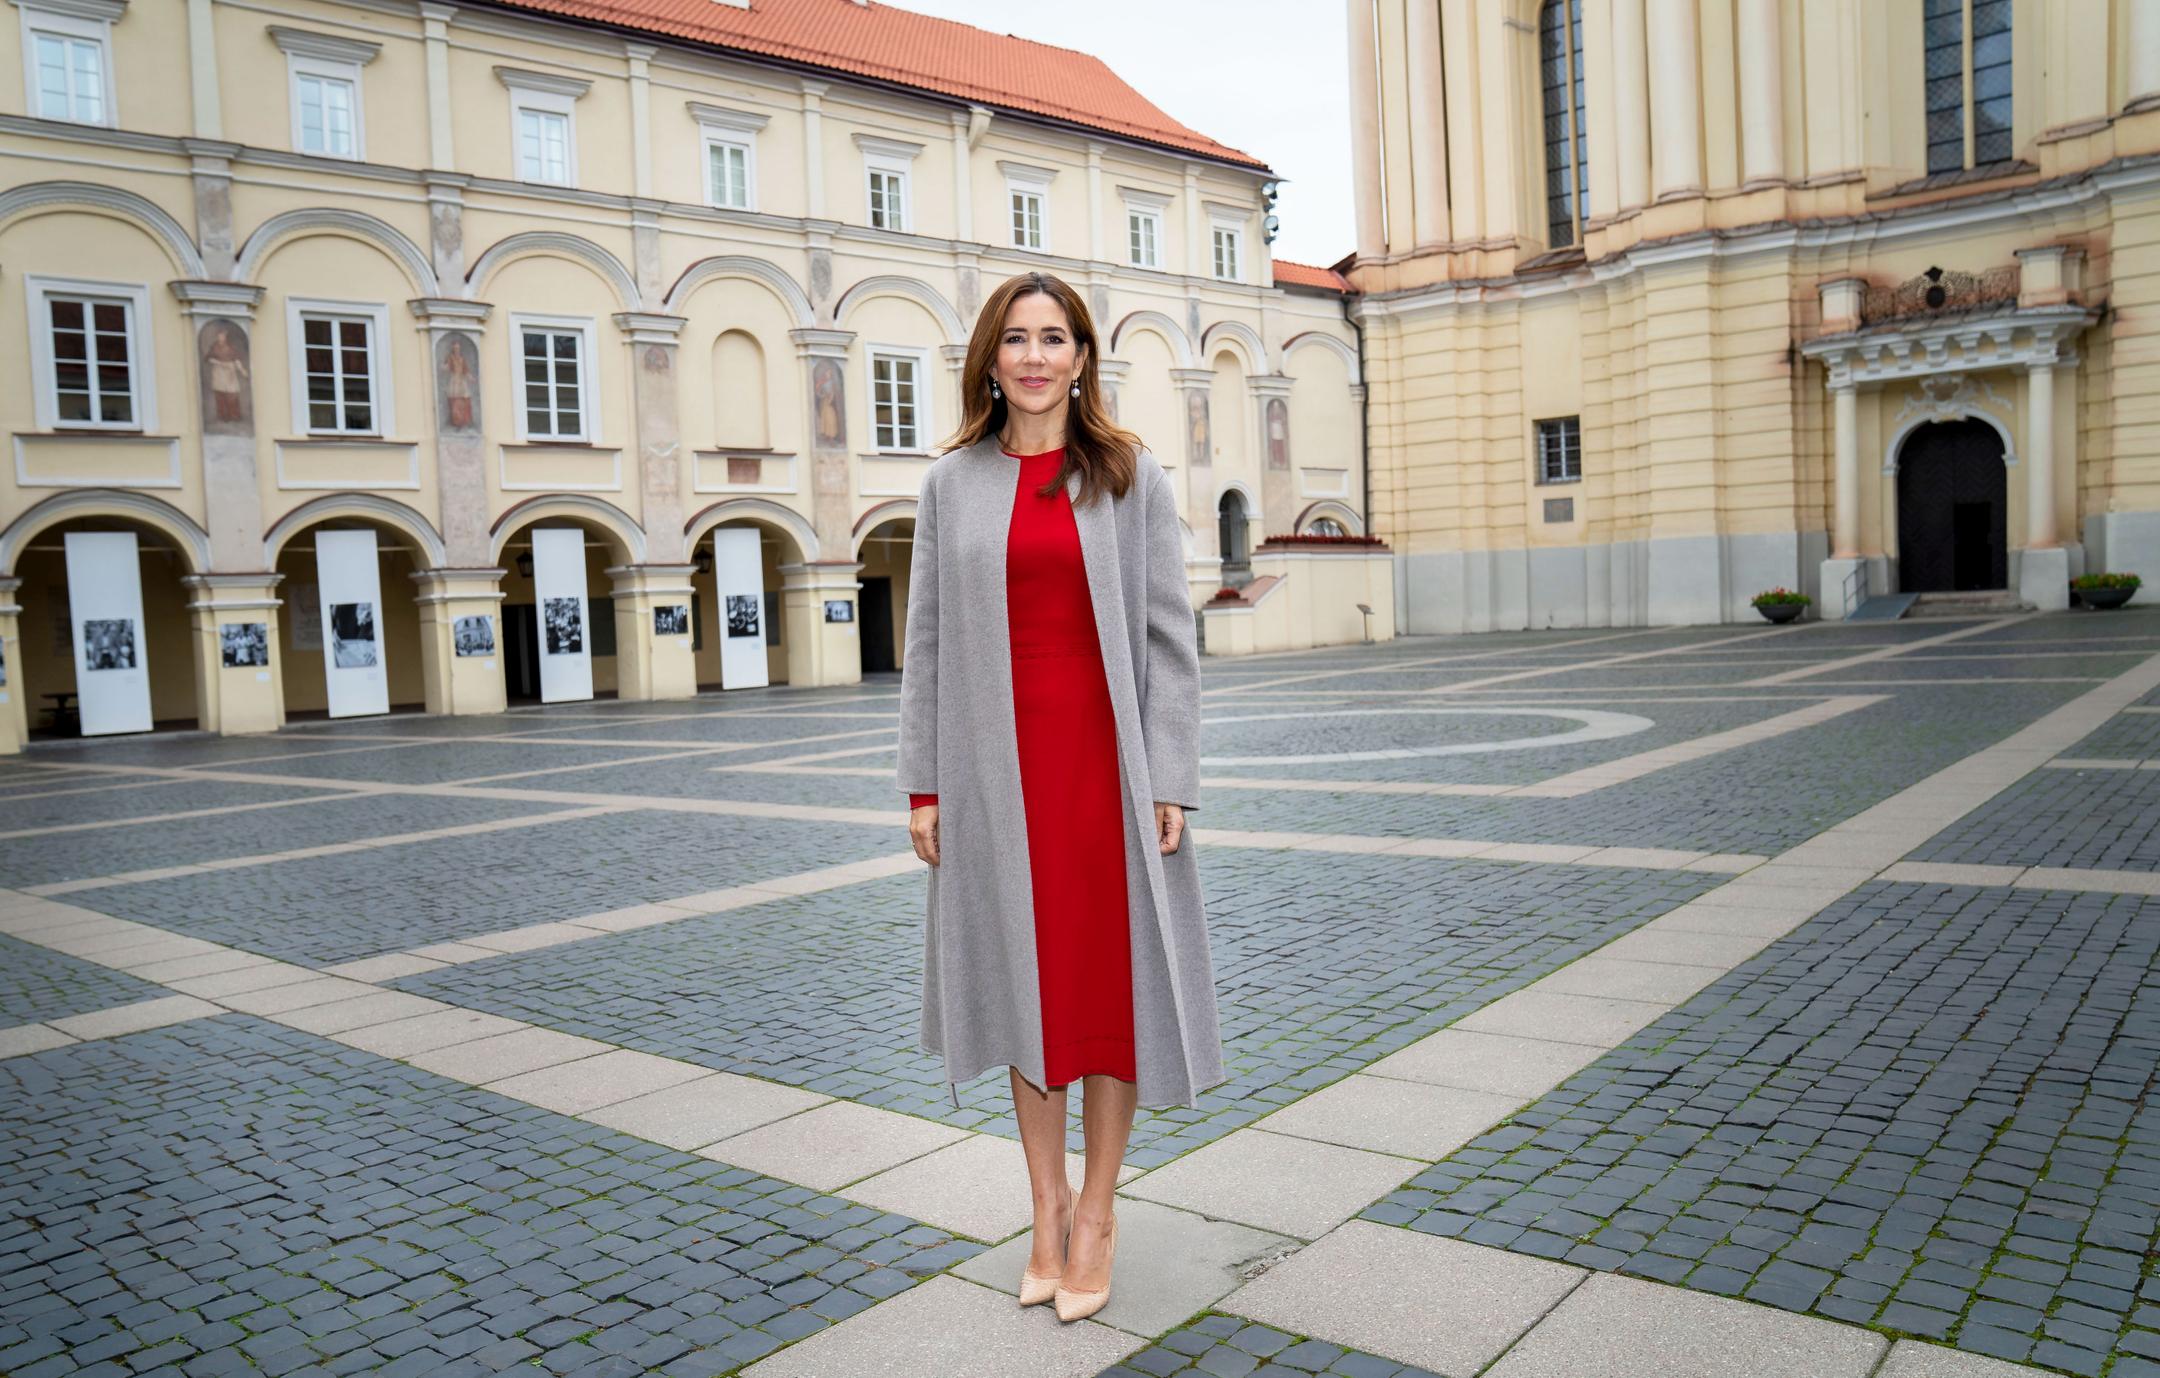 crown-princess-mary-of-denmark-visits-lithuania-03-1633354449149.jpg